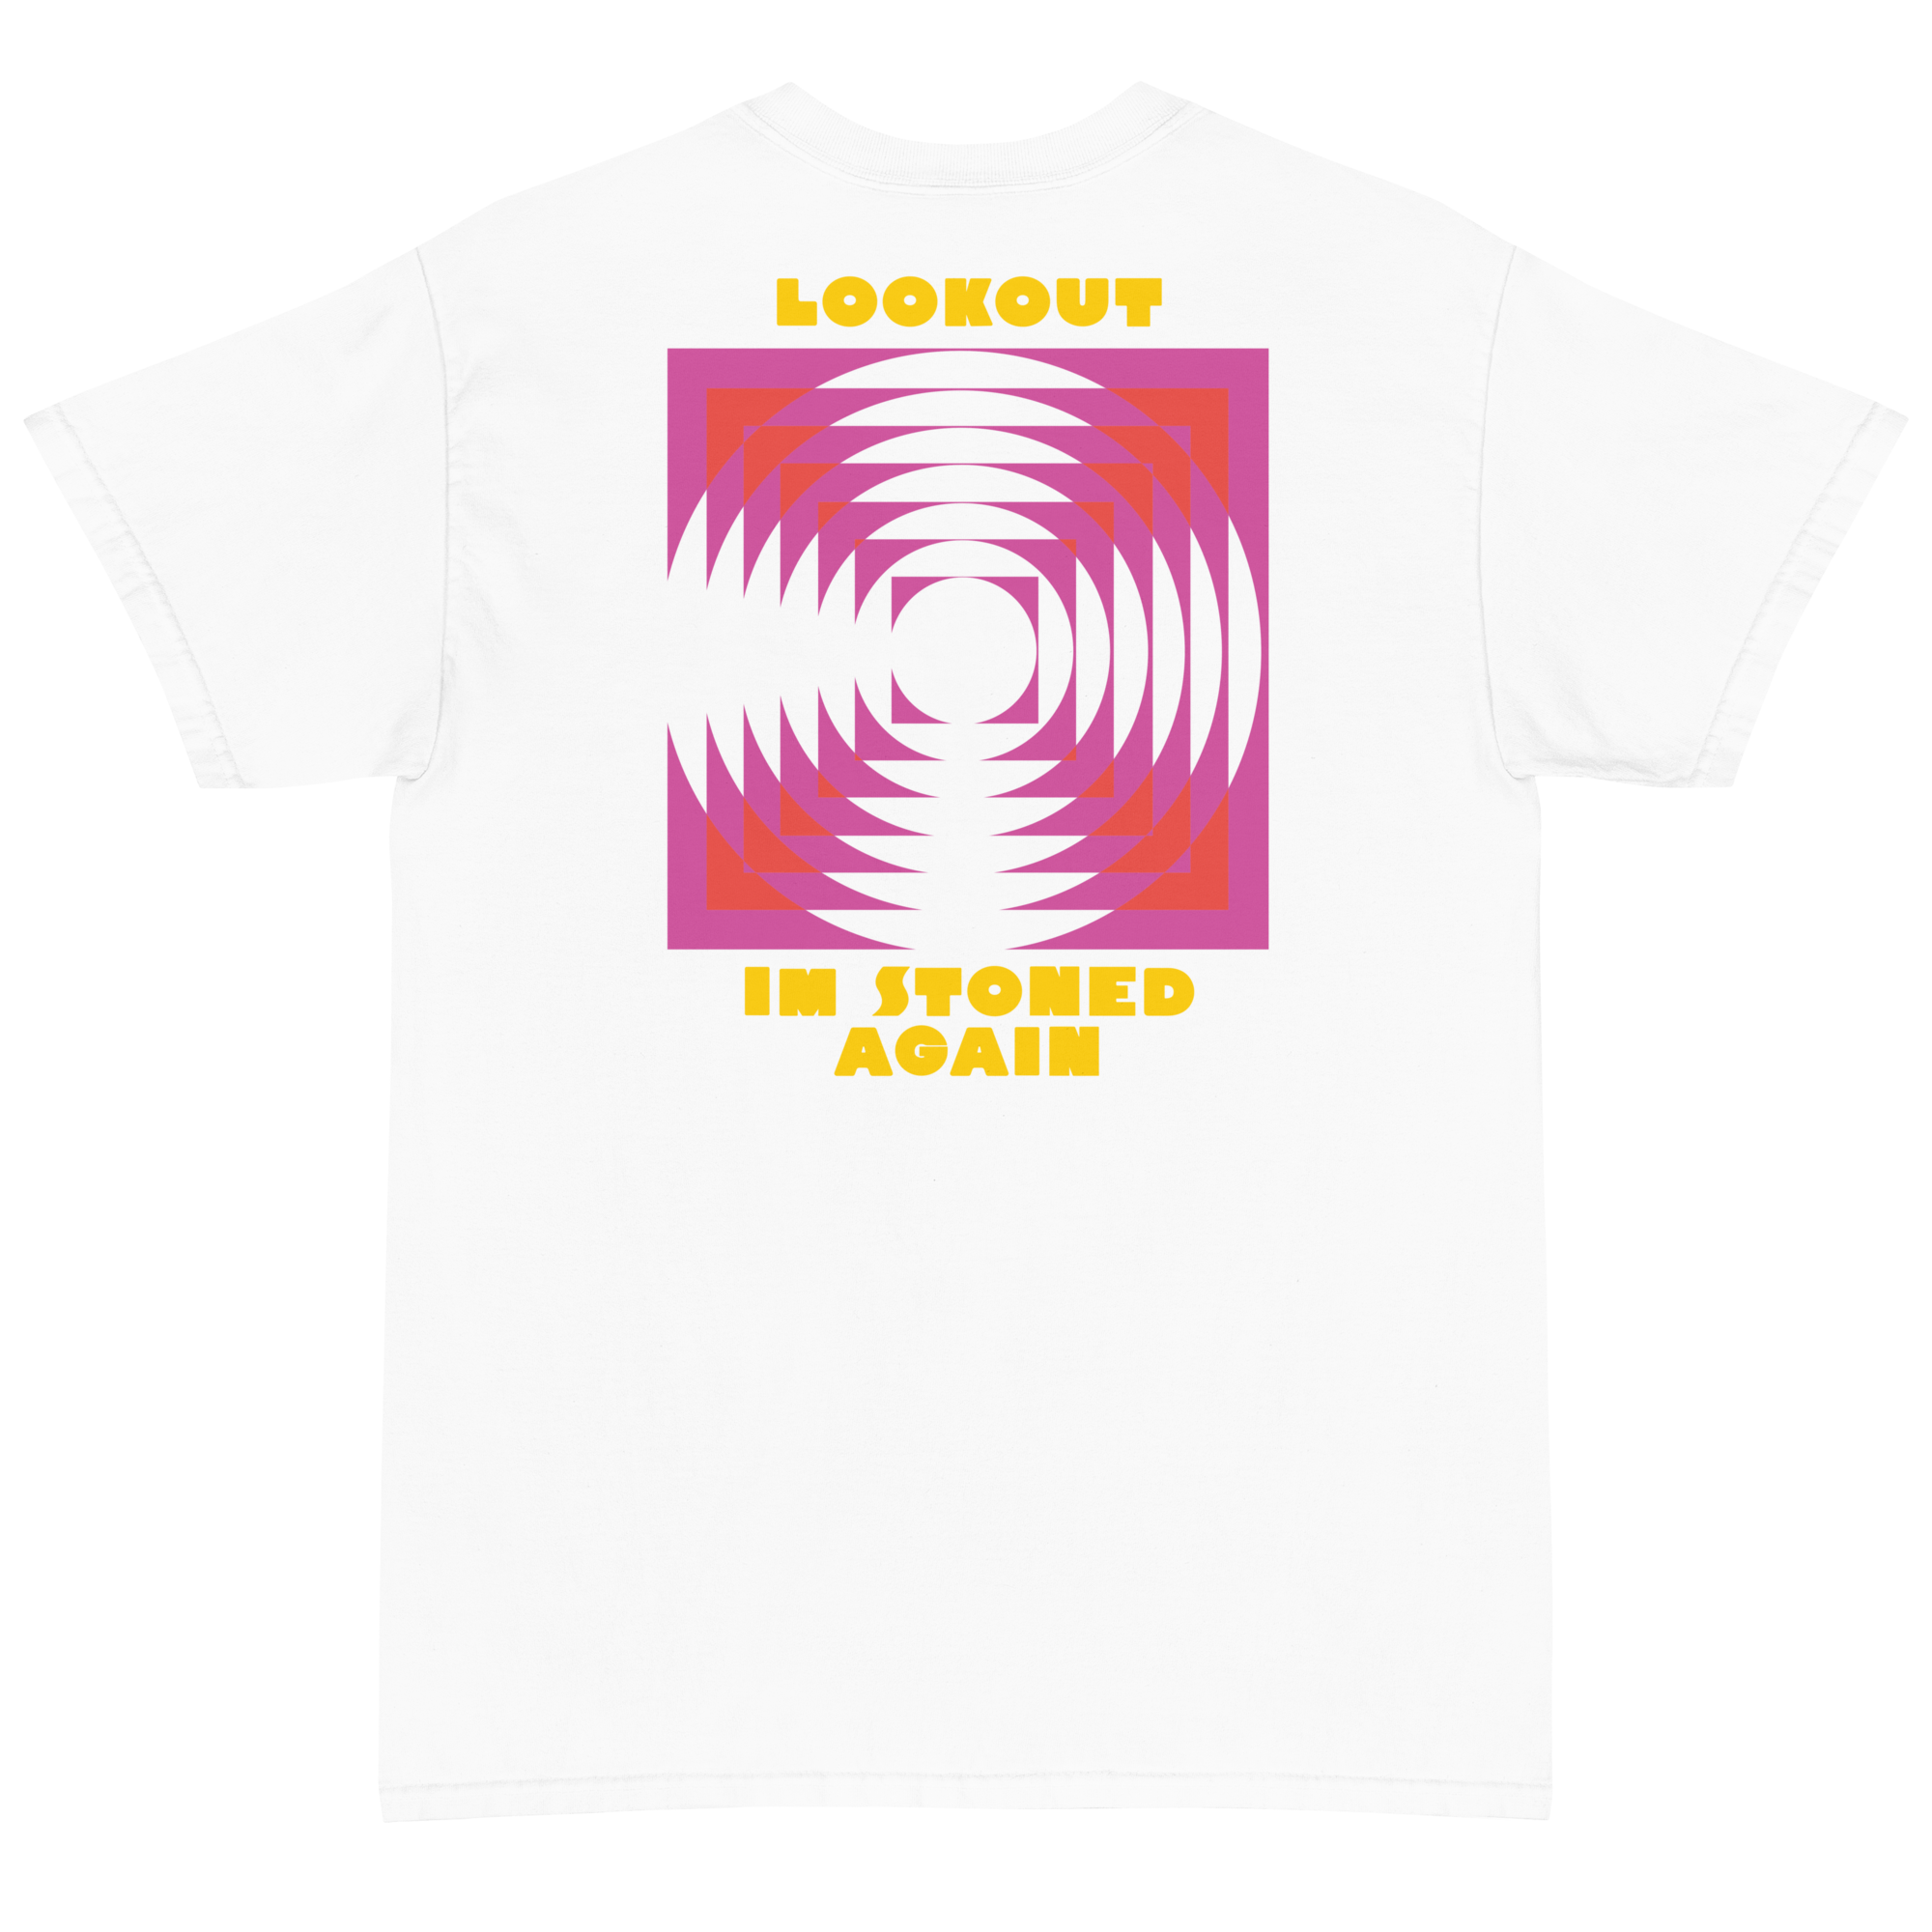 Look Out Tee (From 2 to 3 Tour Edition)